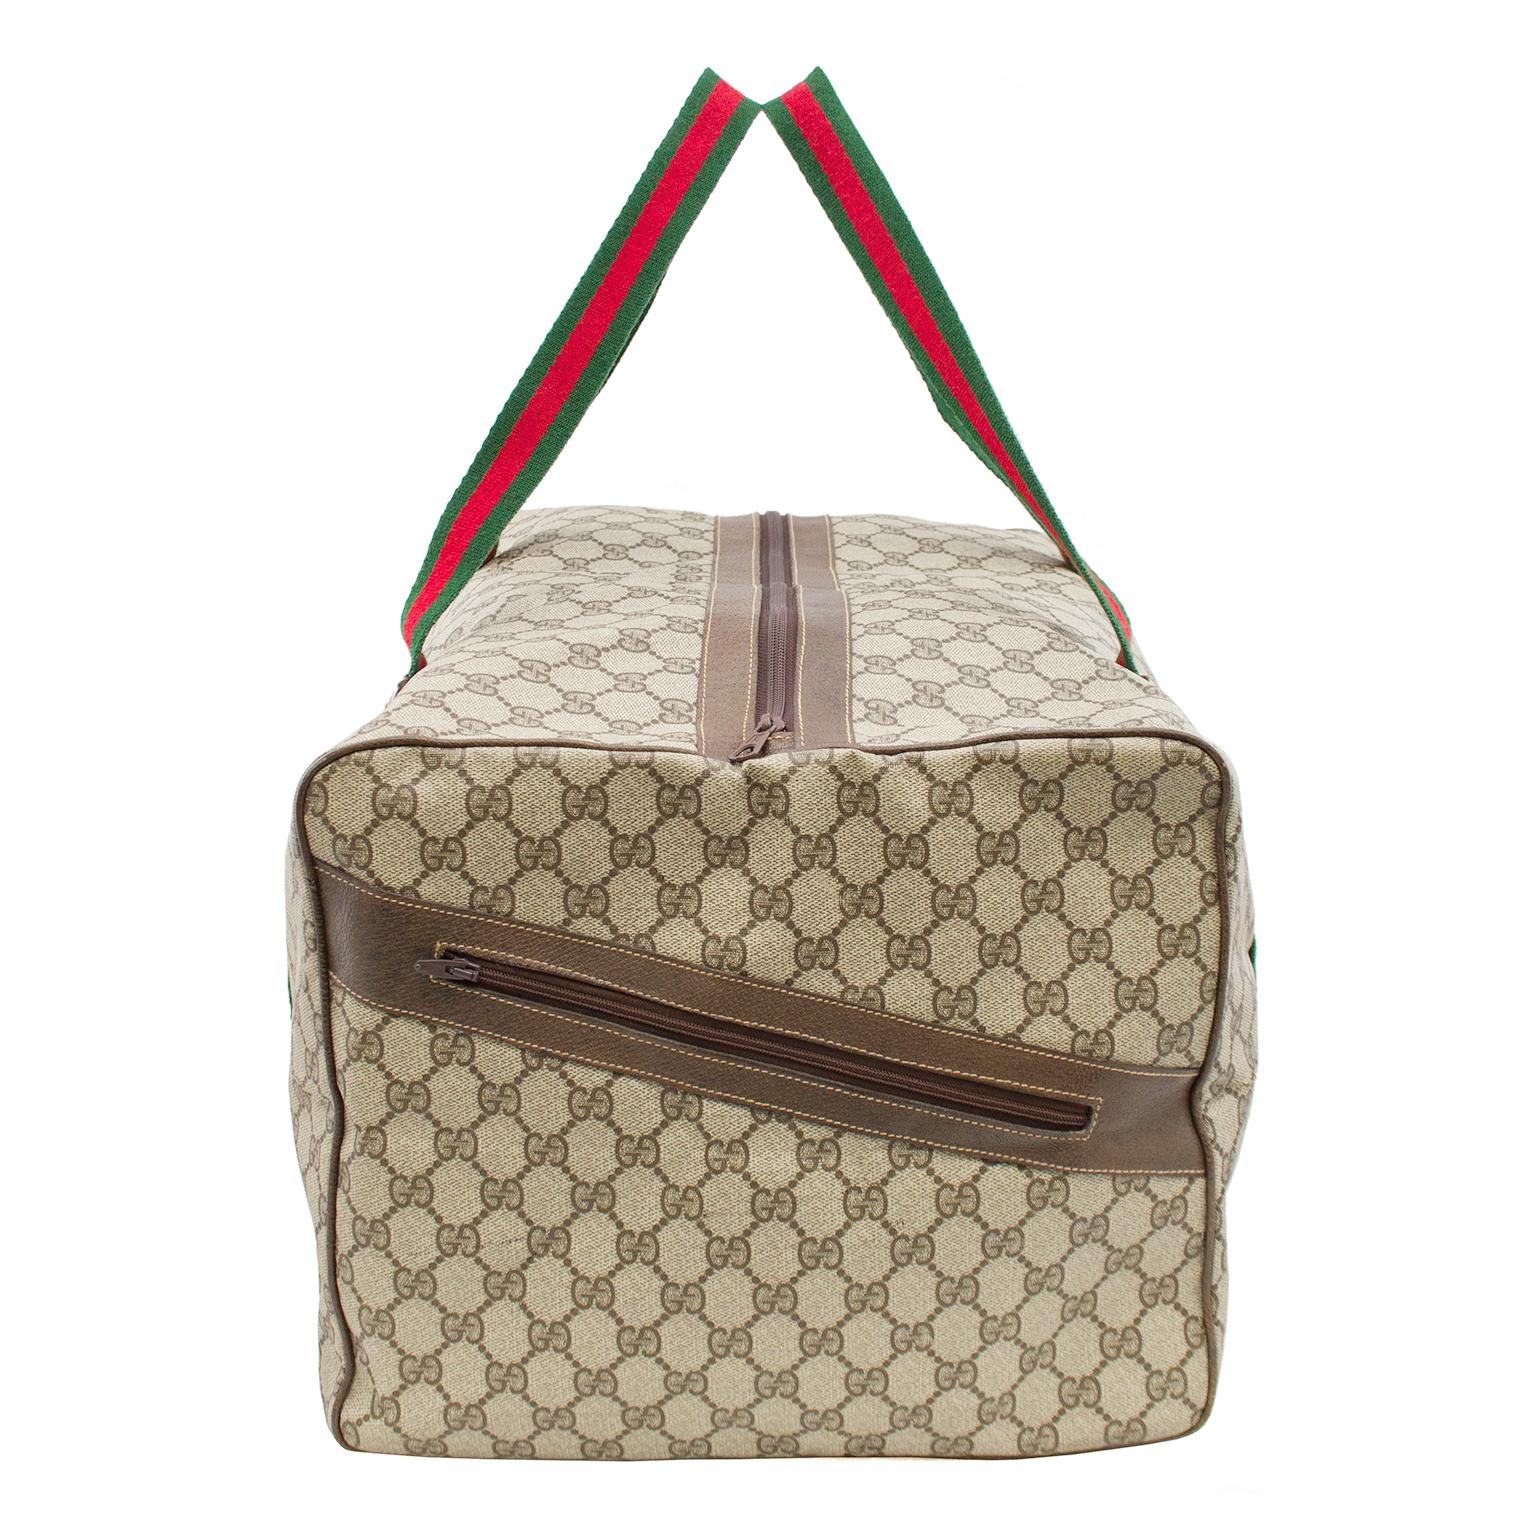 1970s Gucci coated canvas monogram overnight/duffel bag. Iconic green and red striped straps continue down the sides of the bags and underneath. Trimmed in brown leather with top zipper and one exterior zipper pocket on the side. In very good